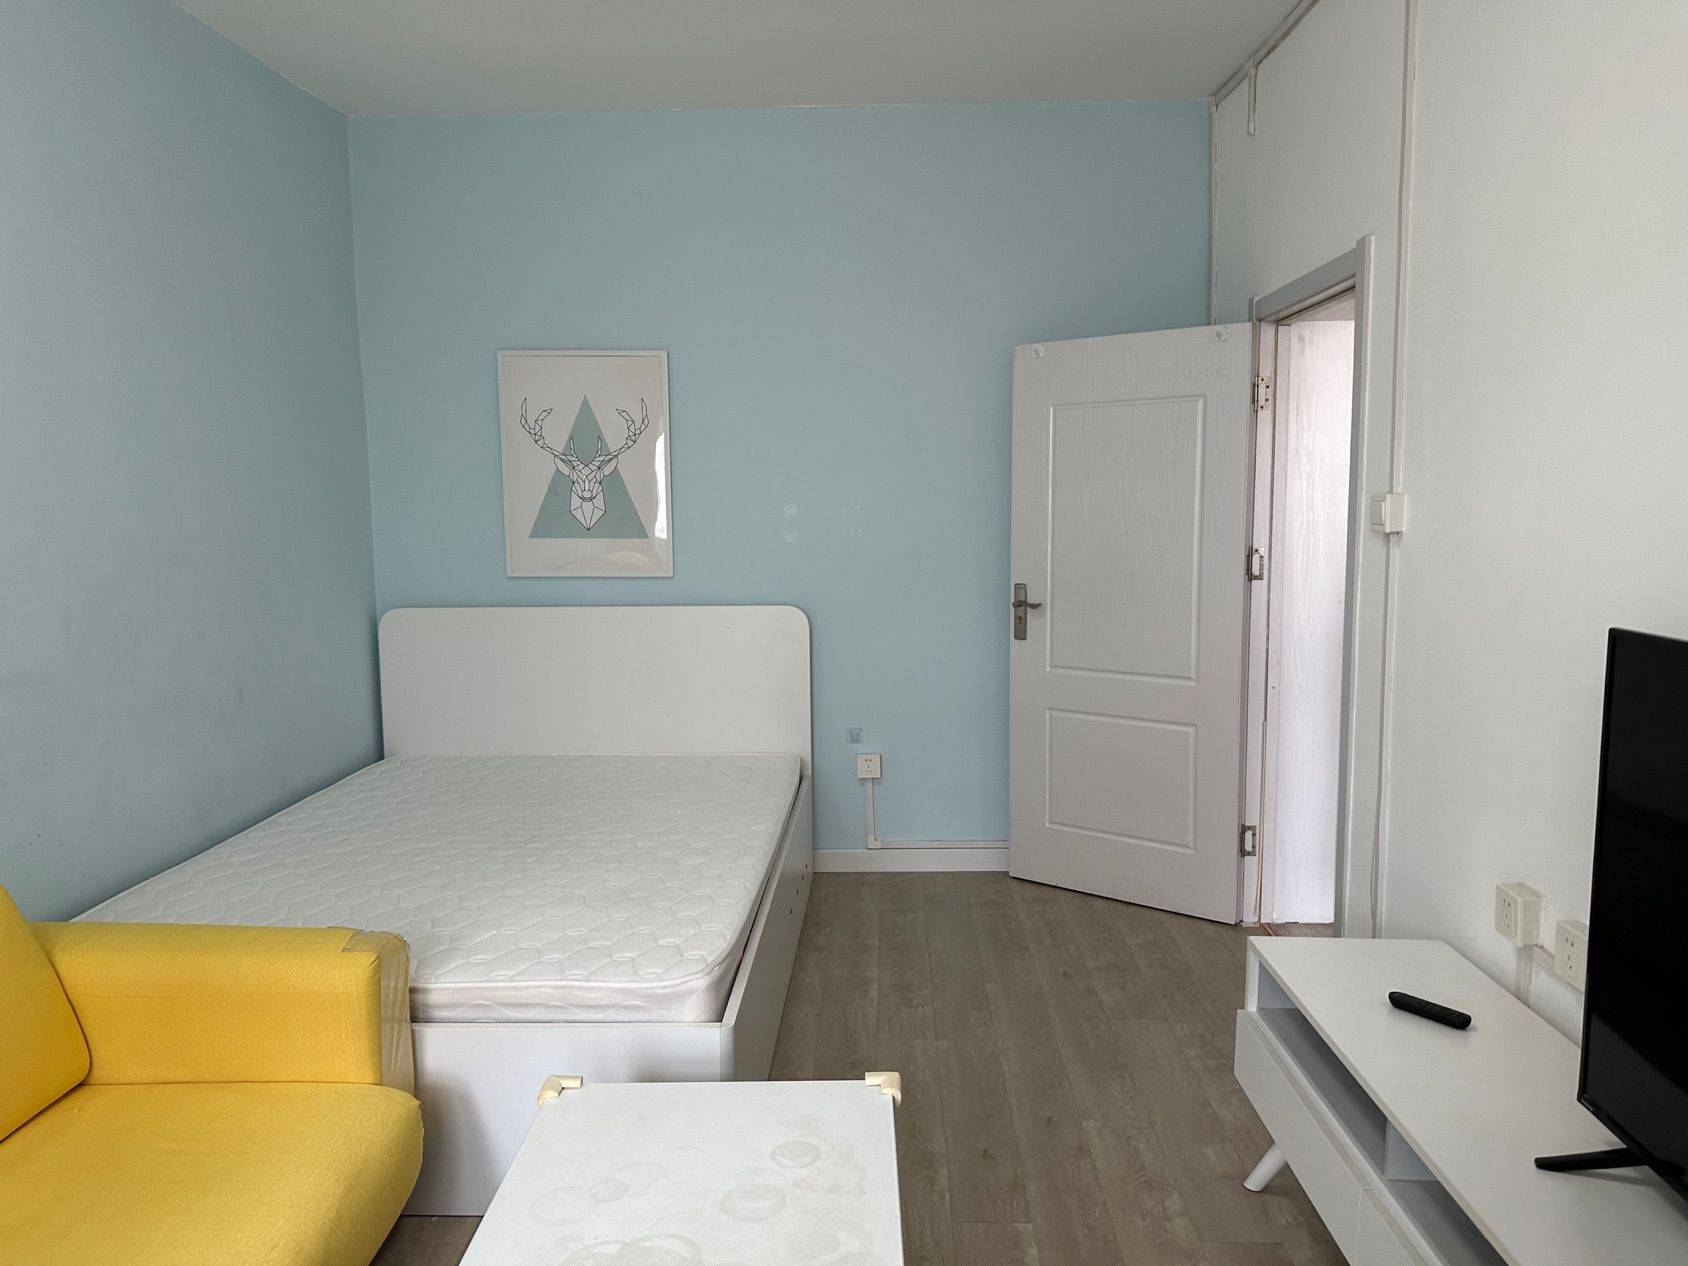 Beijing-Chaoyang-Cozy Home,Clean&Comfy,No Gender Limit,“Friends”,Chilled,LGBTQ Friendly